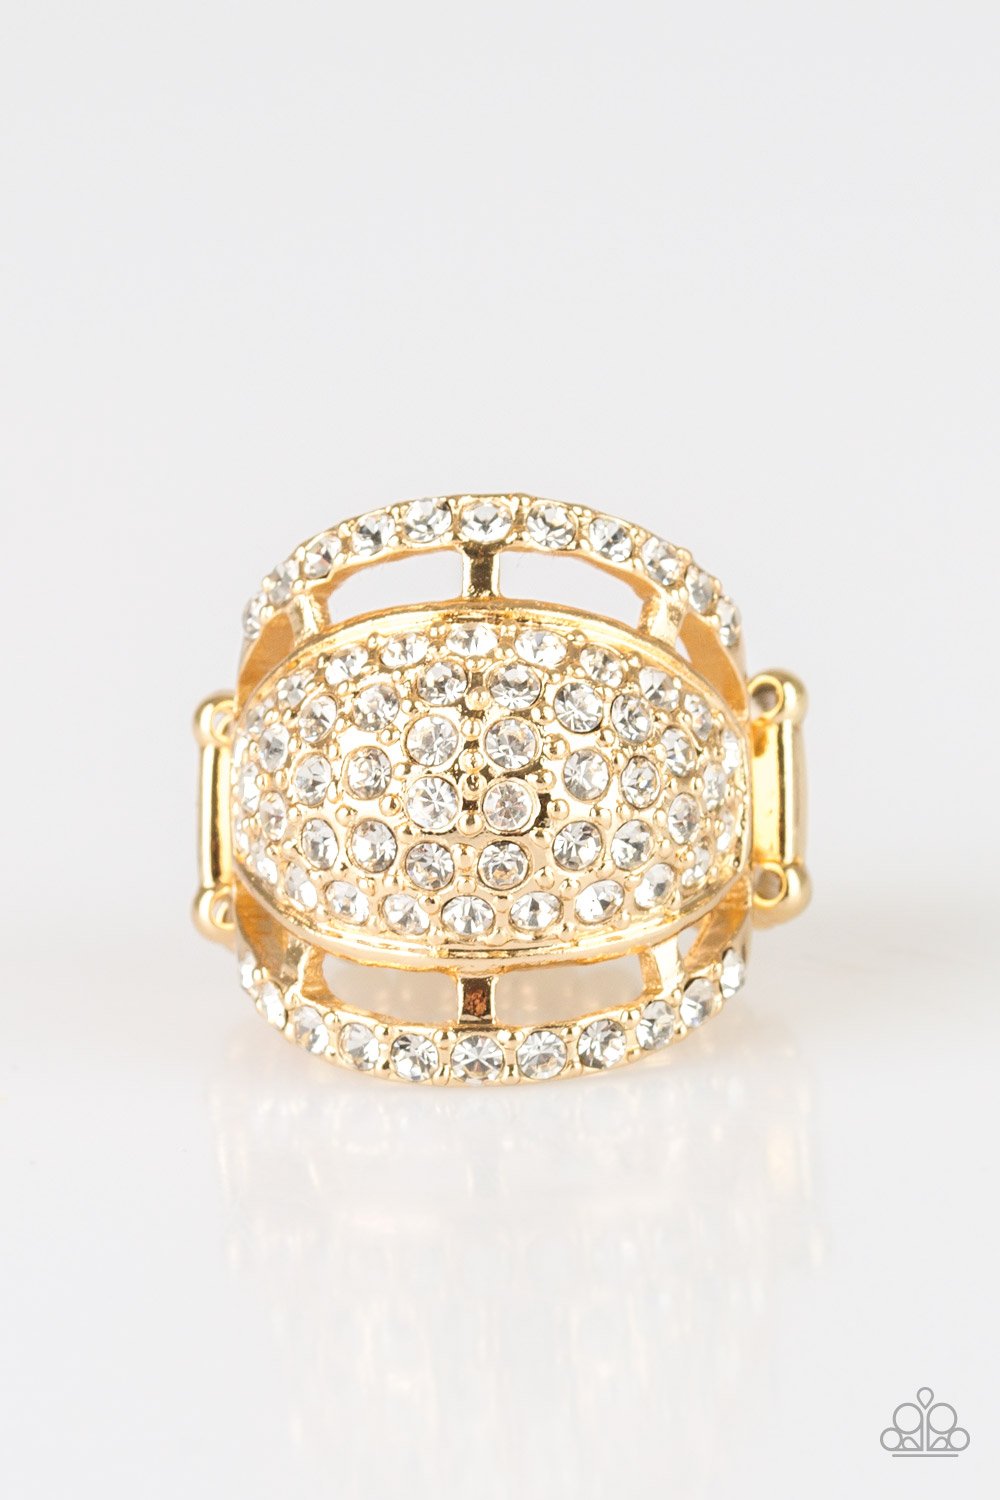 The Seven-FIGURE Itch - Gold Ring